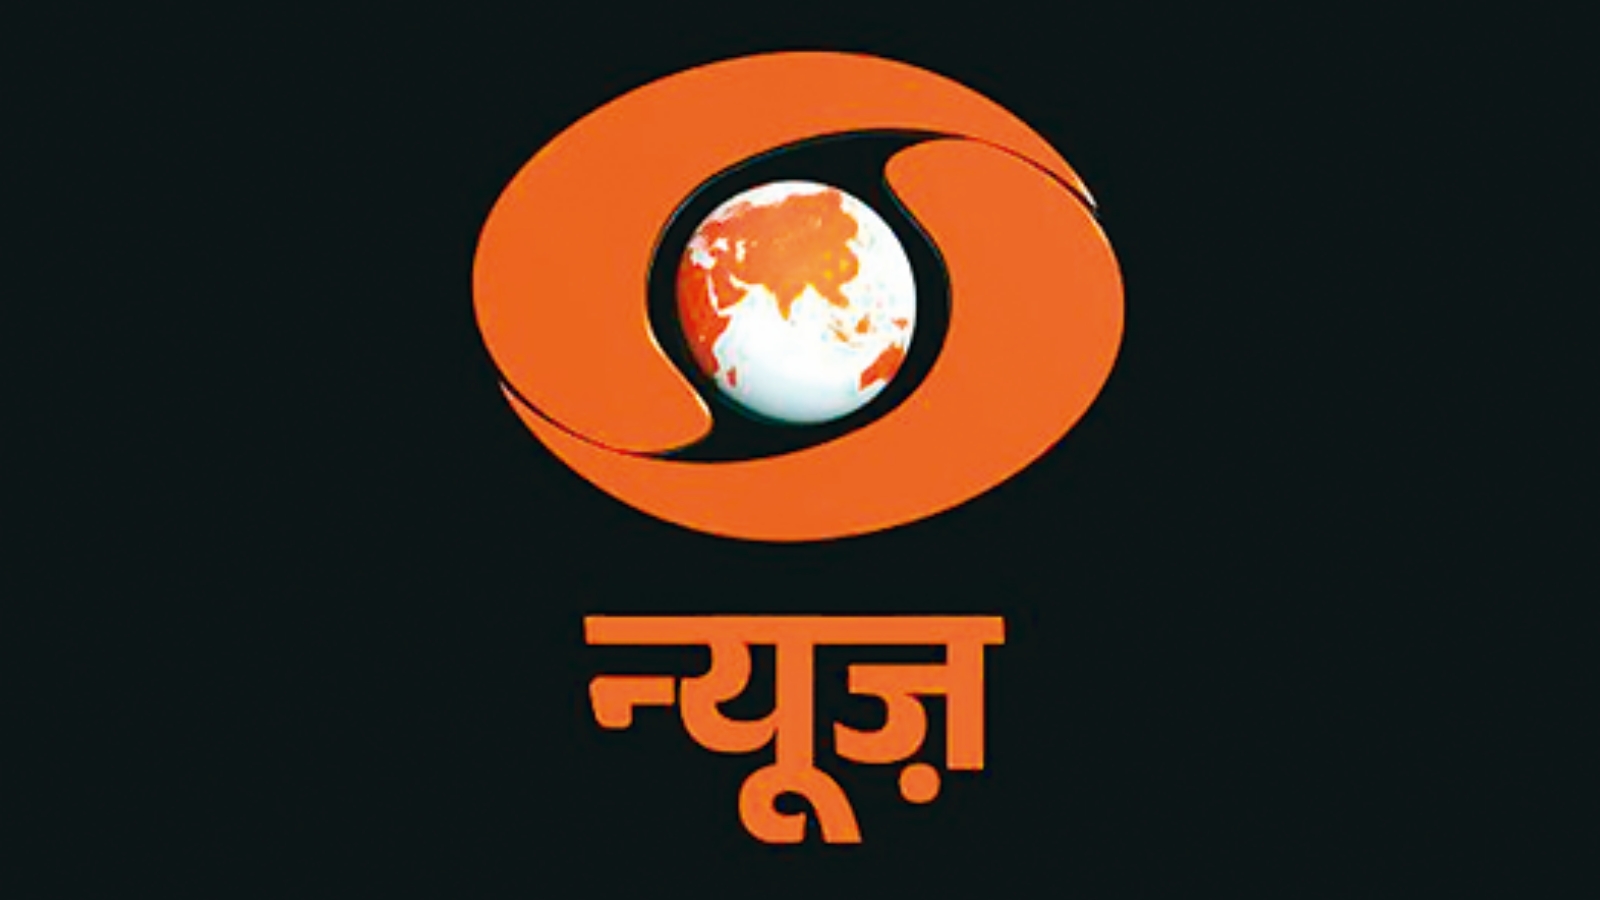 android, dd news under opposition fire over new saffron logo